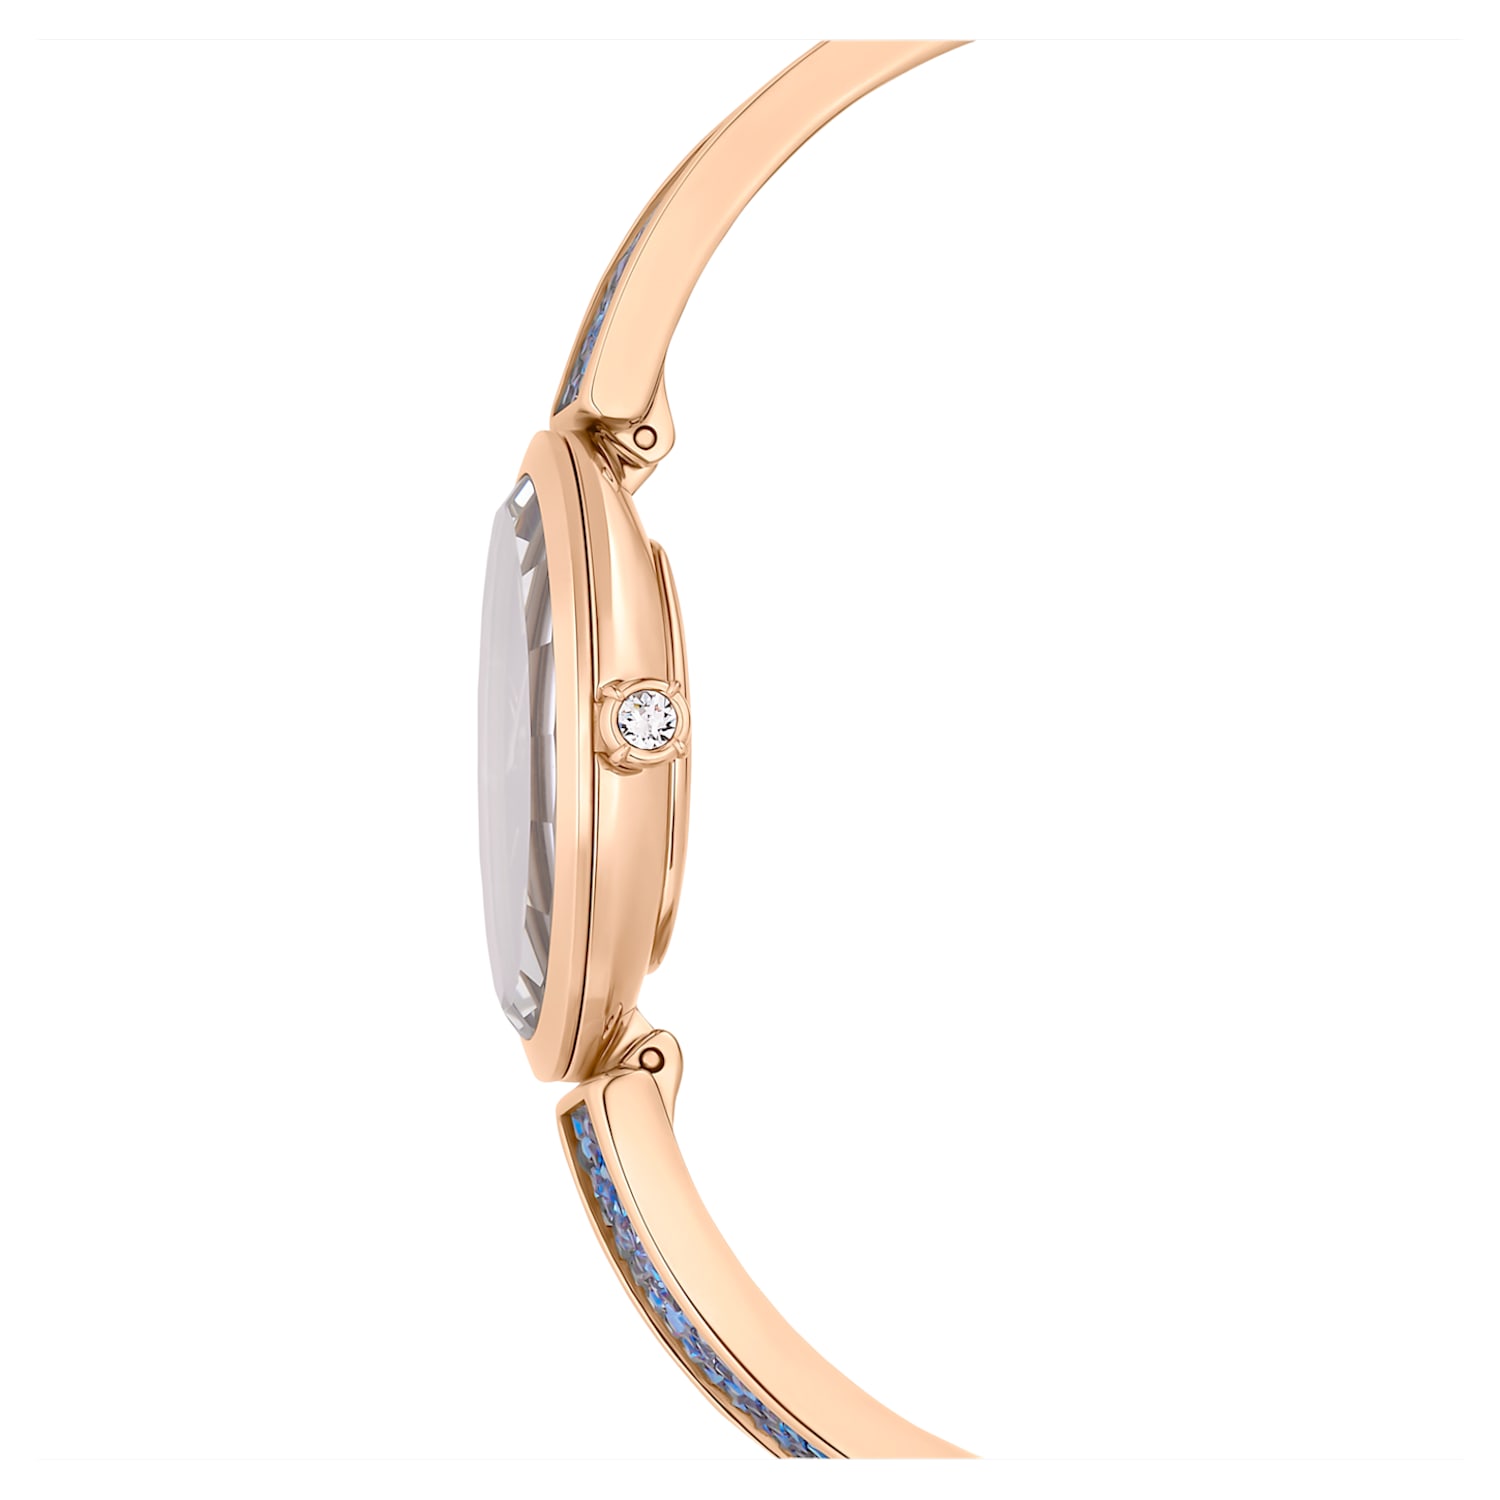 wife Also Greet Crystal Rock Oval watch, Swiss Made, Metal bracelet, Blue, Rose gold-tone  finish